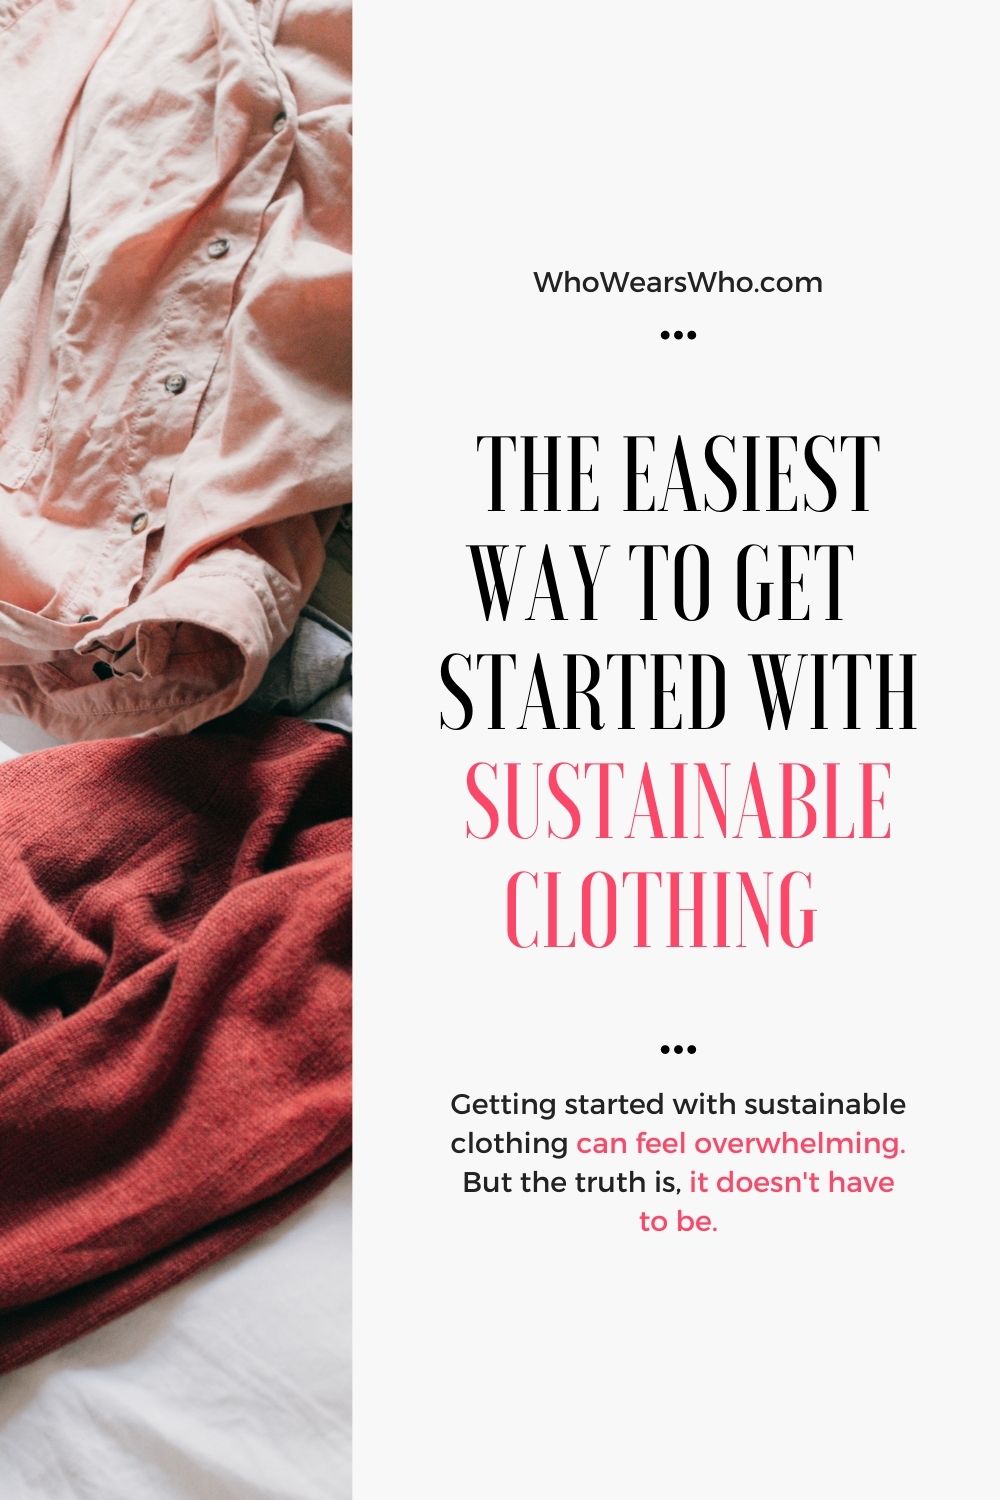 The easiest way to get started with sustainable clothing